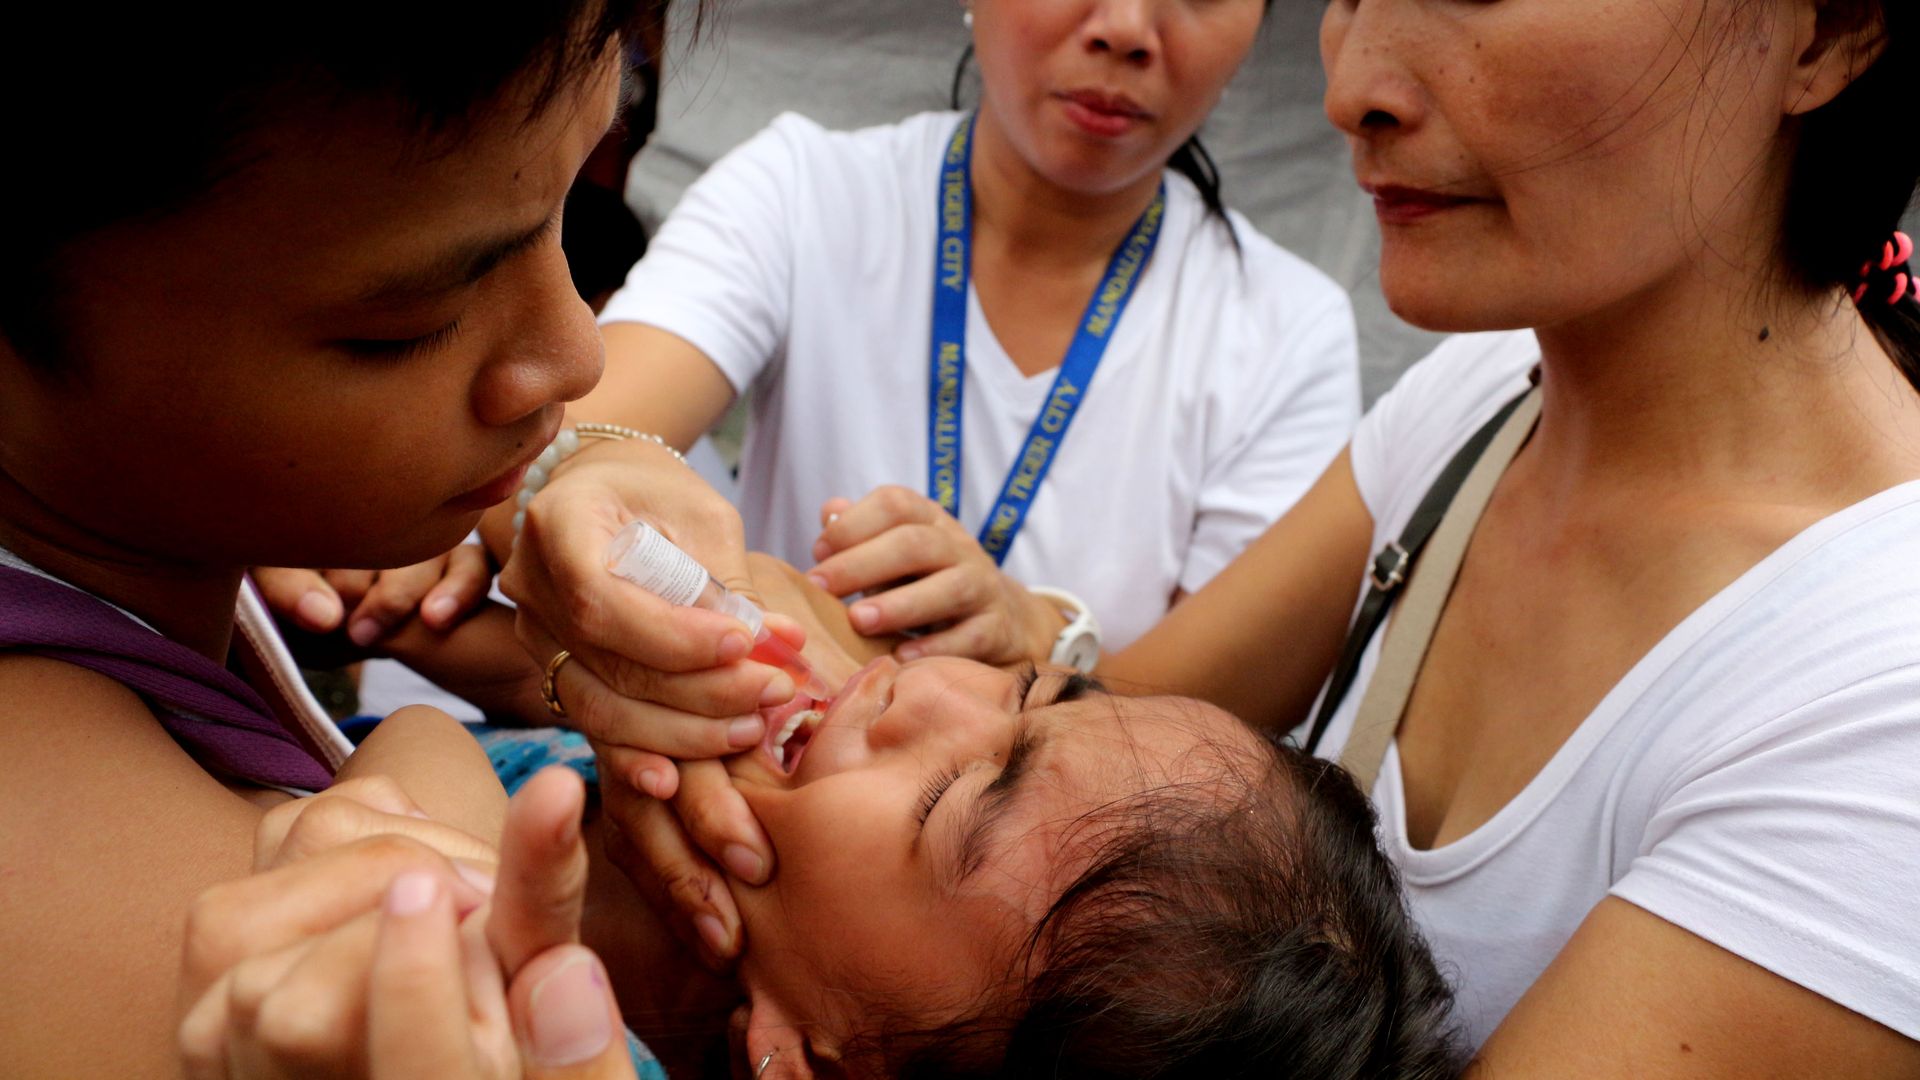 In this image, three women hold a child as a vaccine is administered to it through a dropper into its mouth.